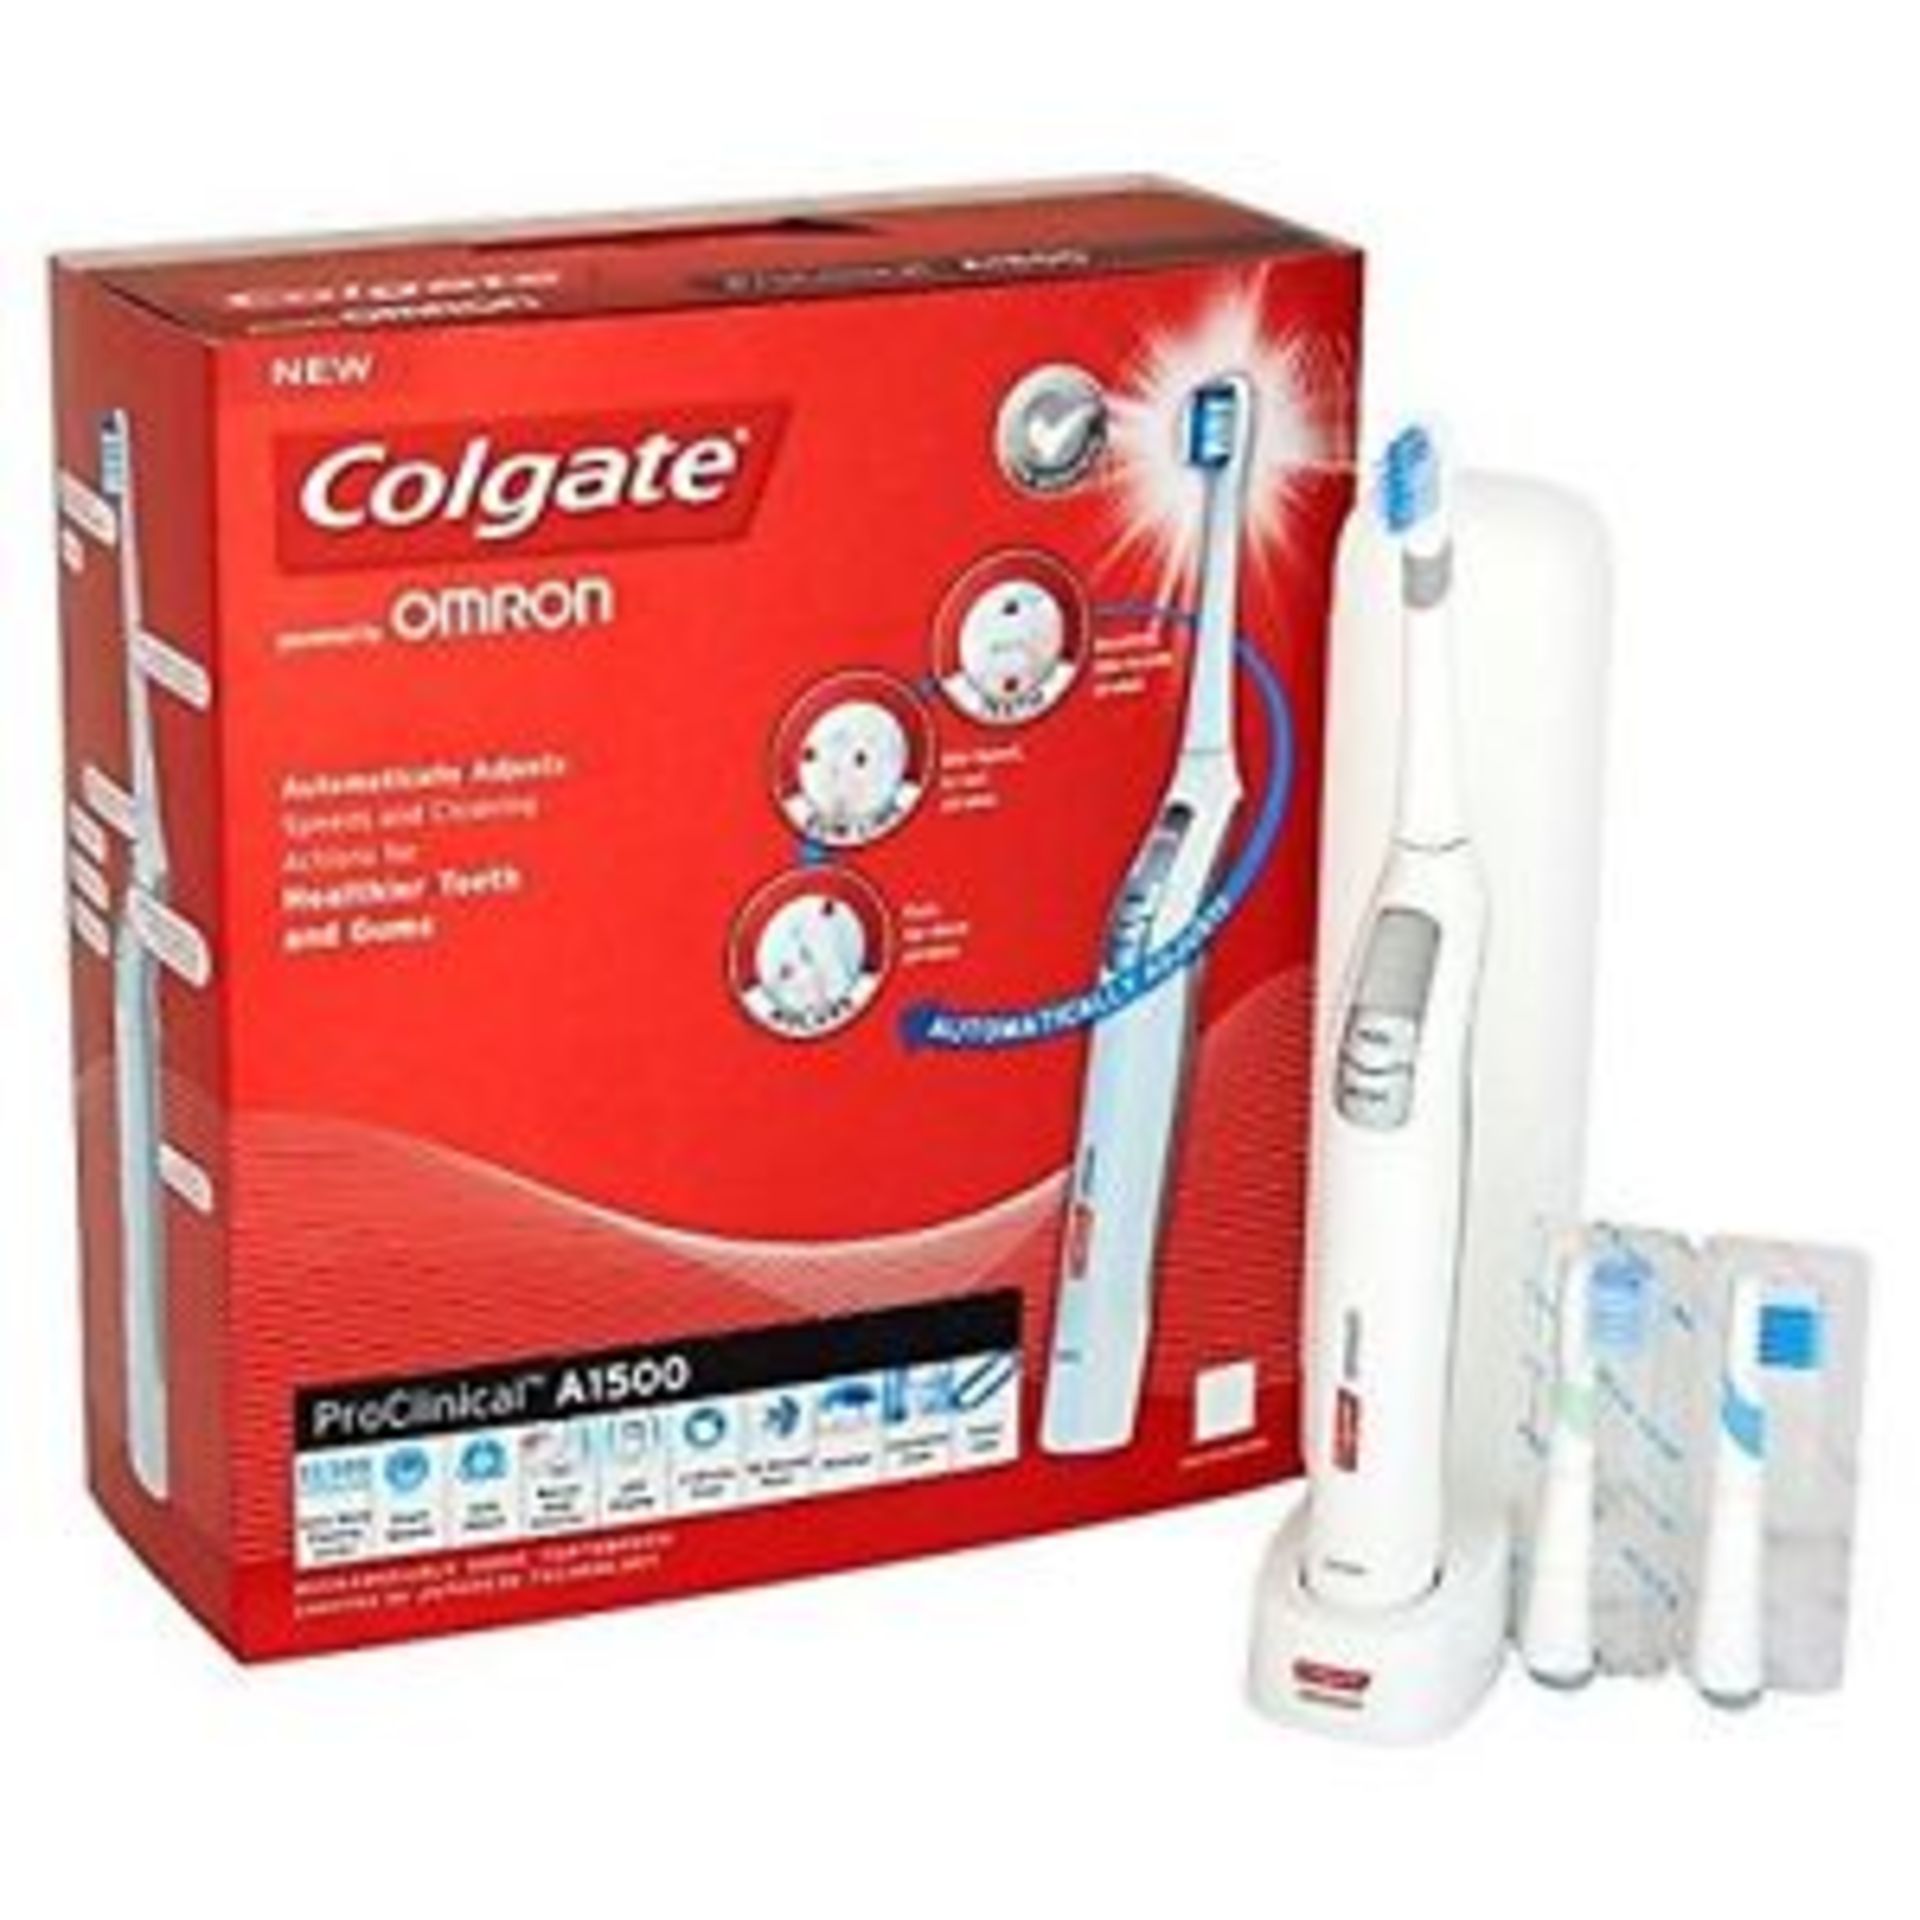 V Brand New Colgate ProClinical A1500 Rechargeable Sonic Toothbrush-Powered By Omron-Automatically